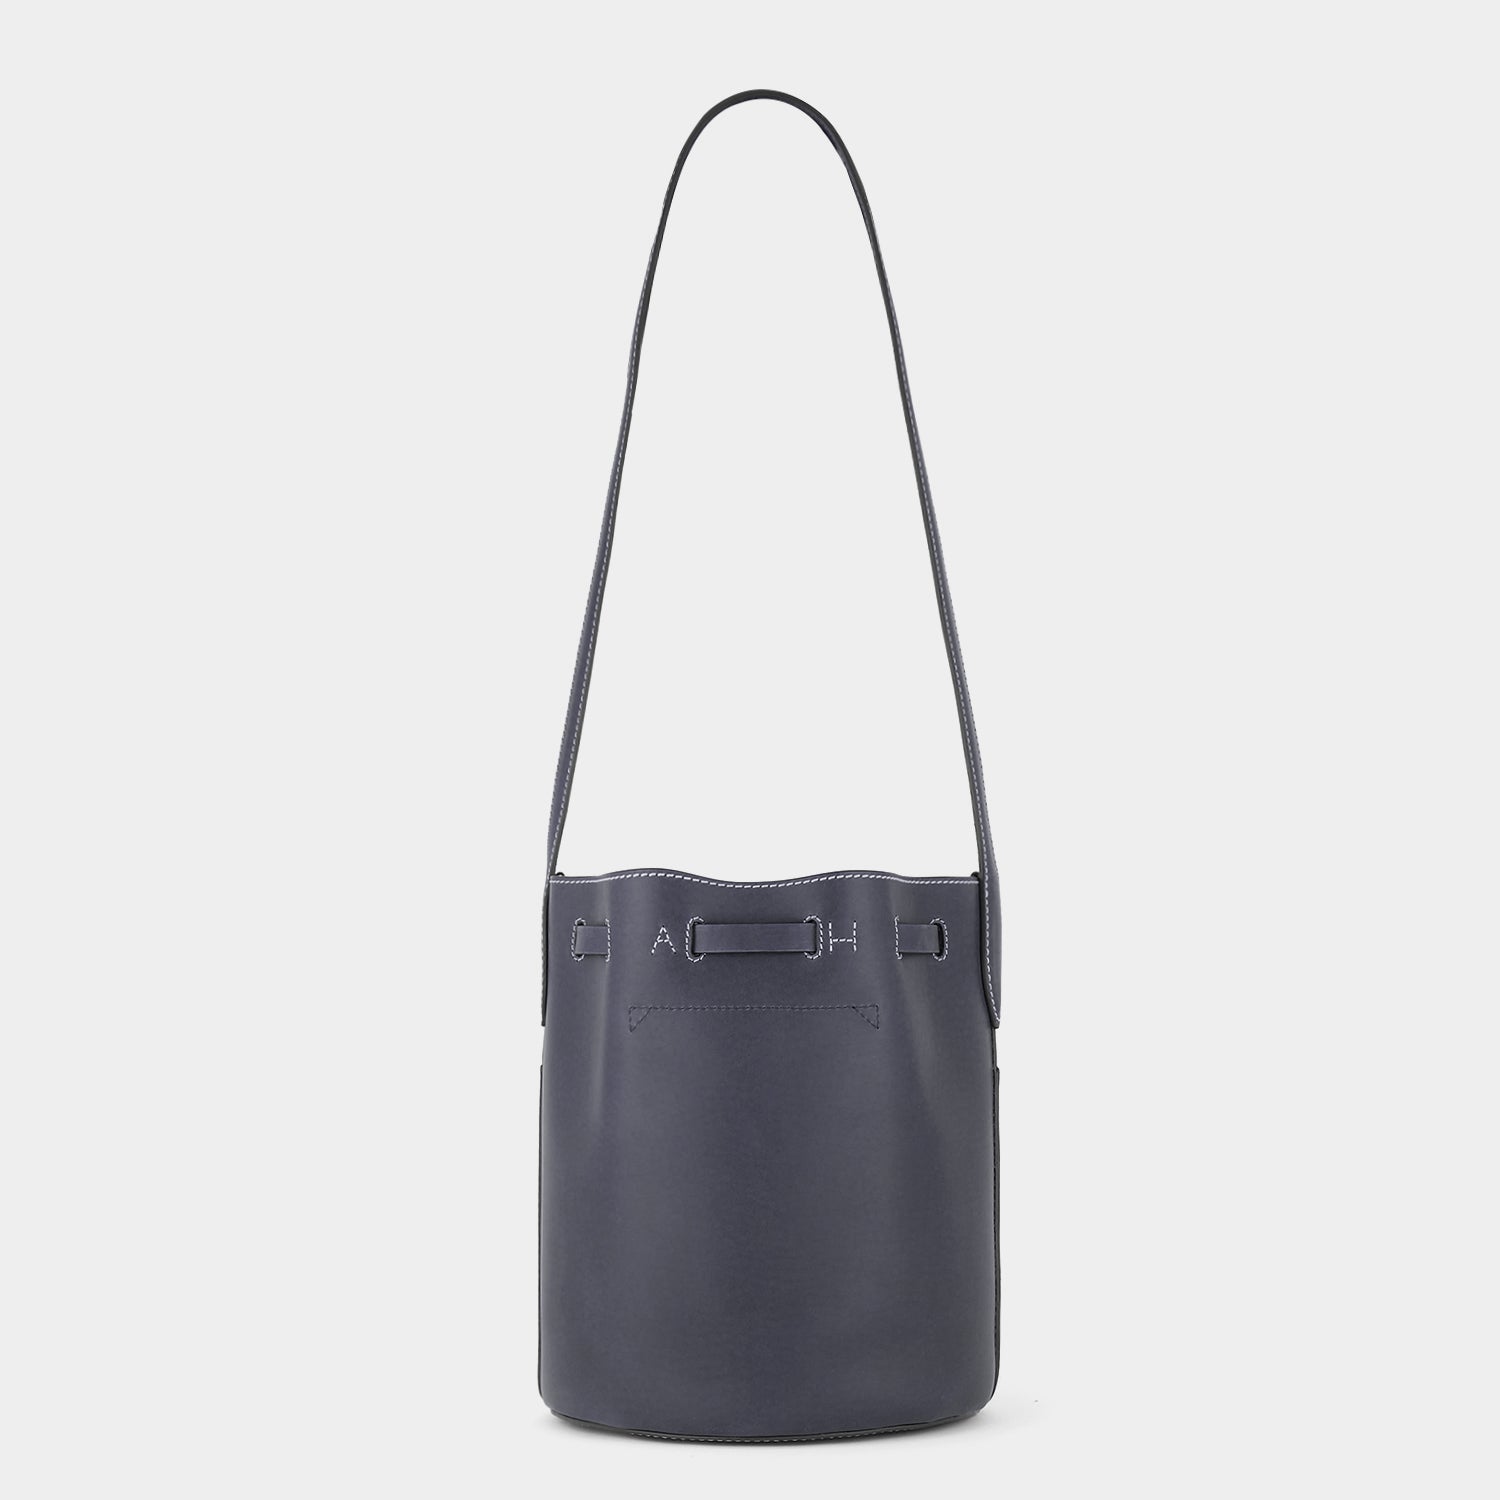 Return to Nature Small Bucket Bag -

                  
                    Compostable Leather in Marine -
                  

                  Anya Hindmarch US
